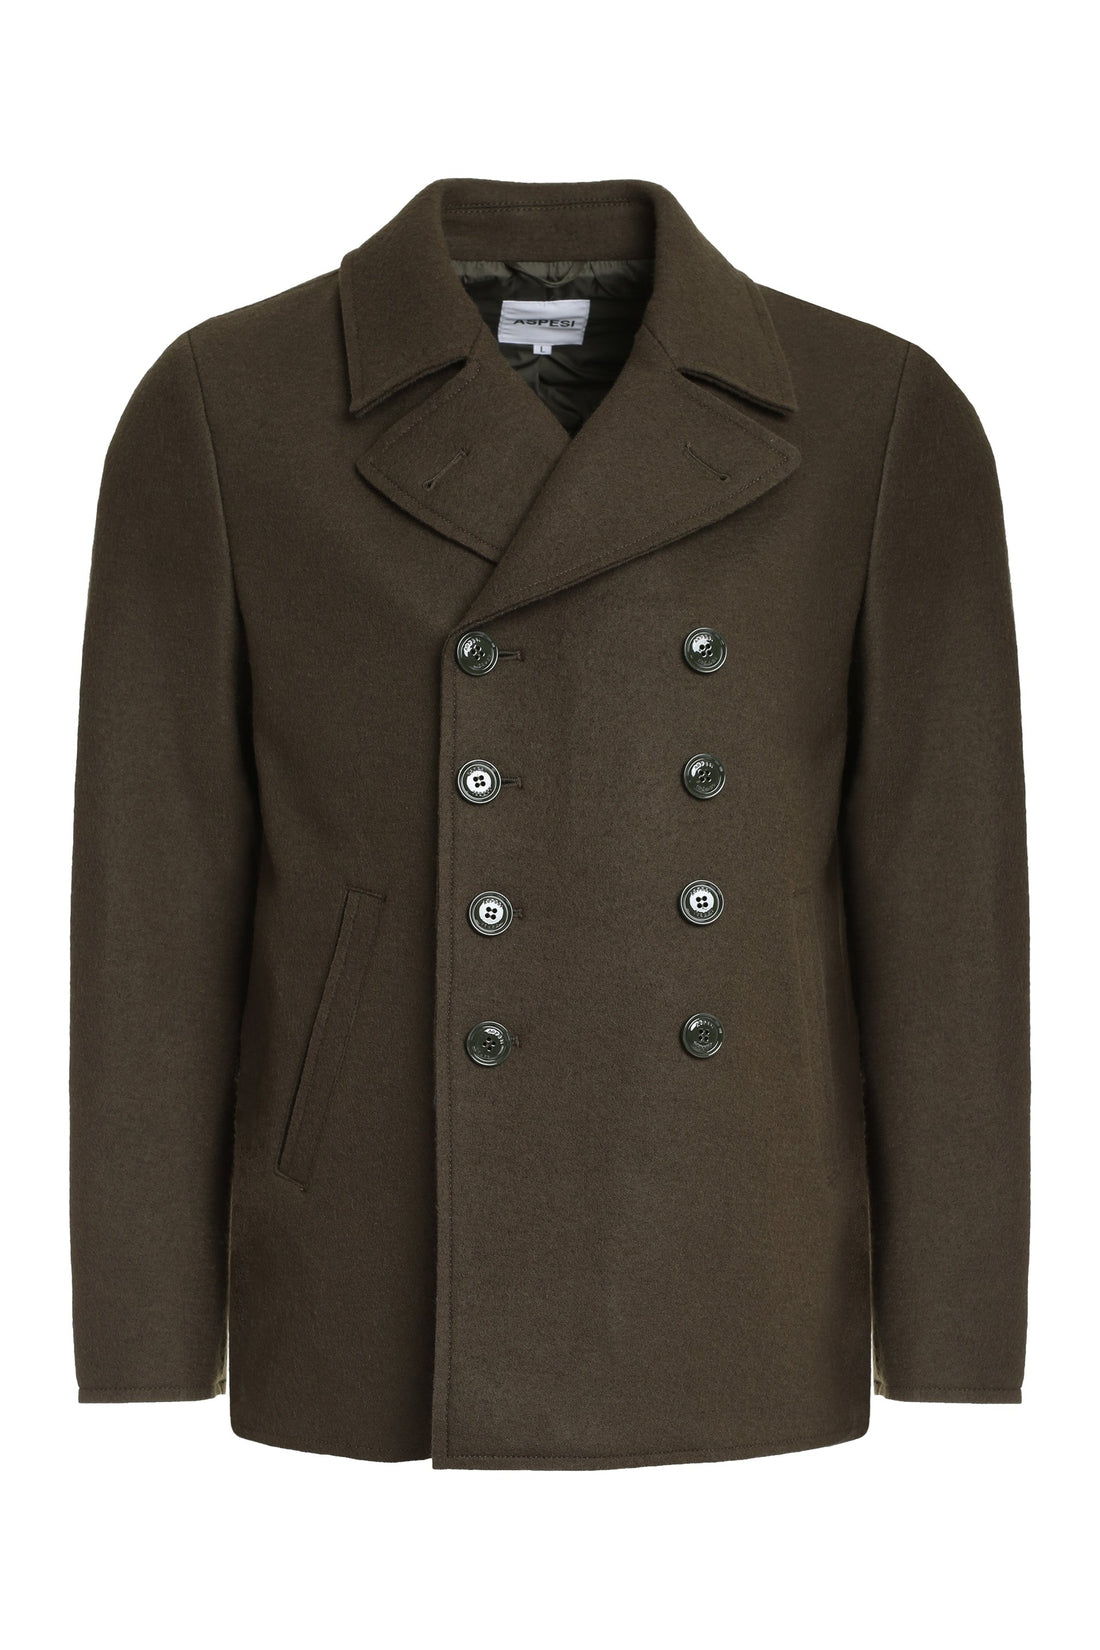 Aspesi-OUTLET-SALE-Double-breasted wool coat-ARCHIVIST